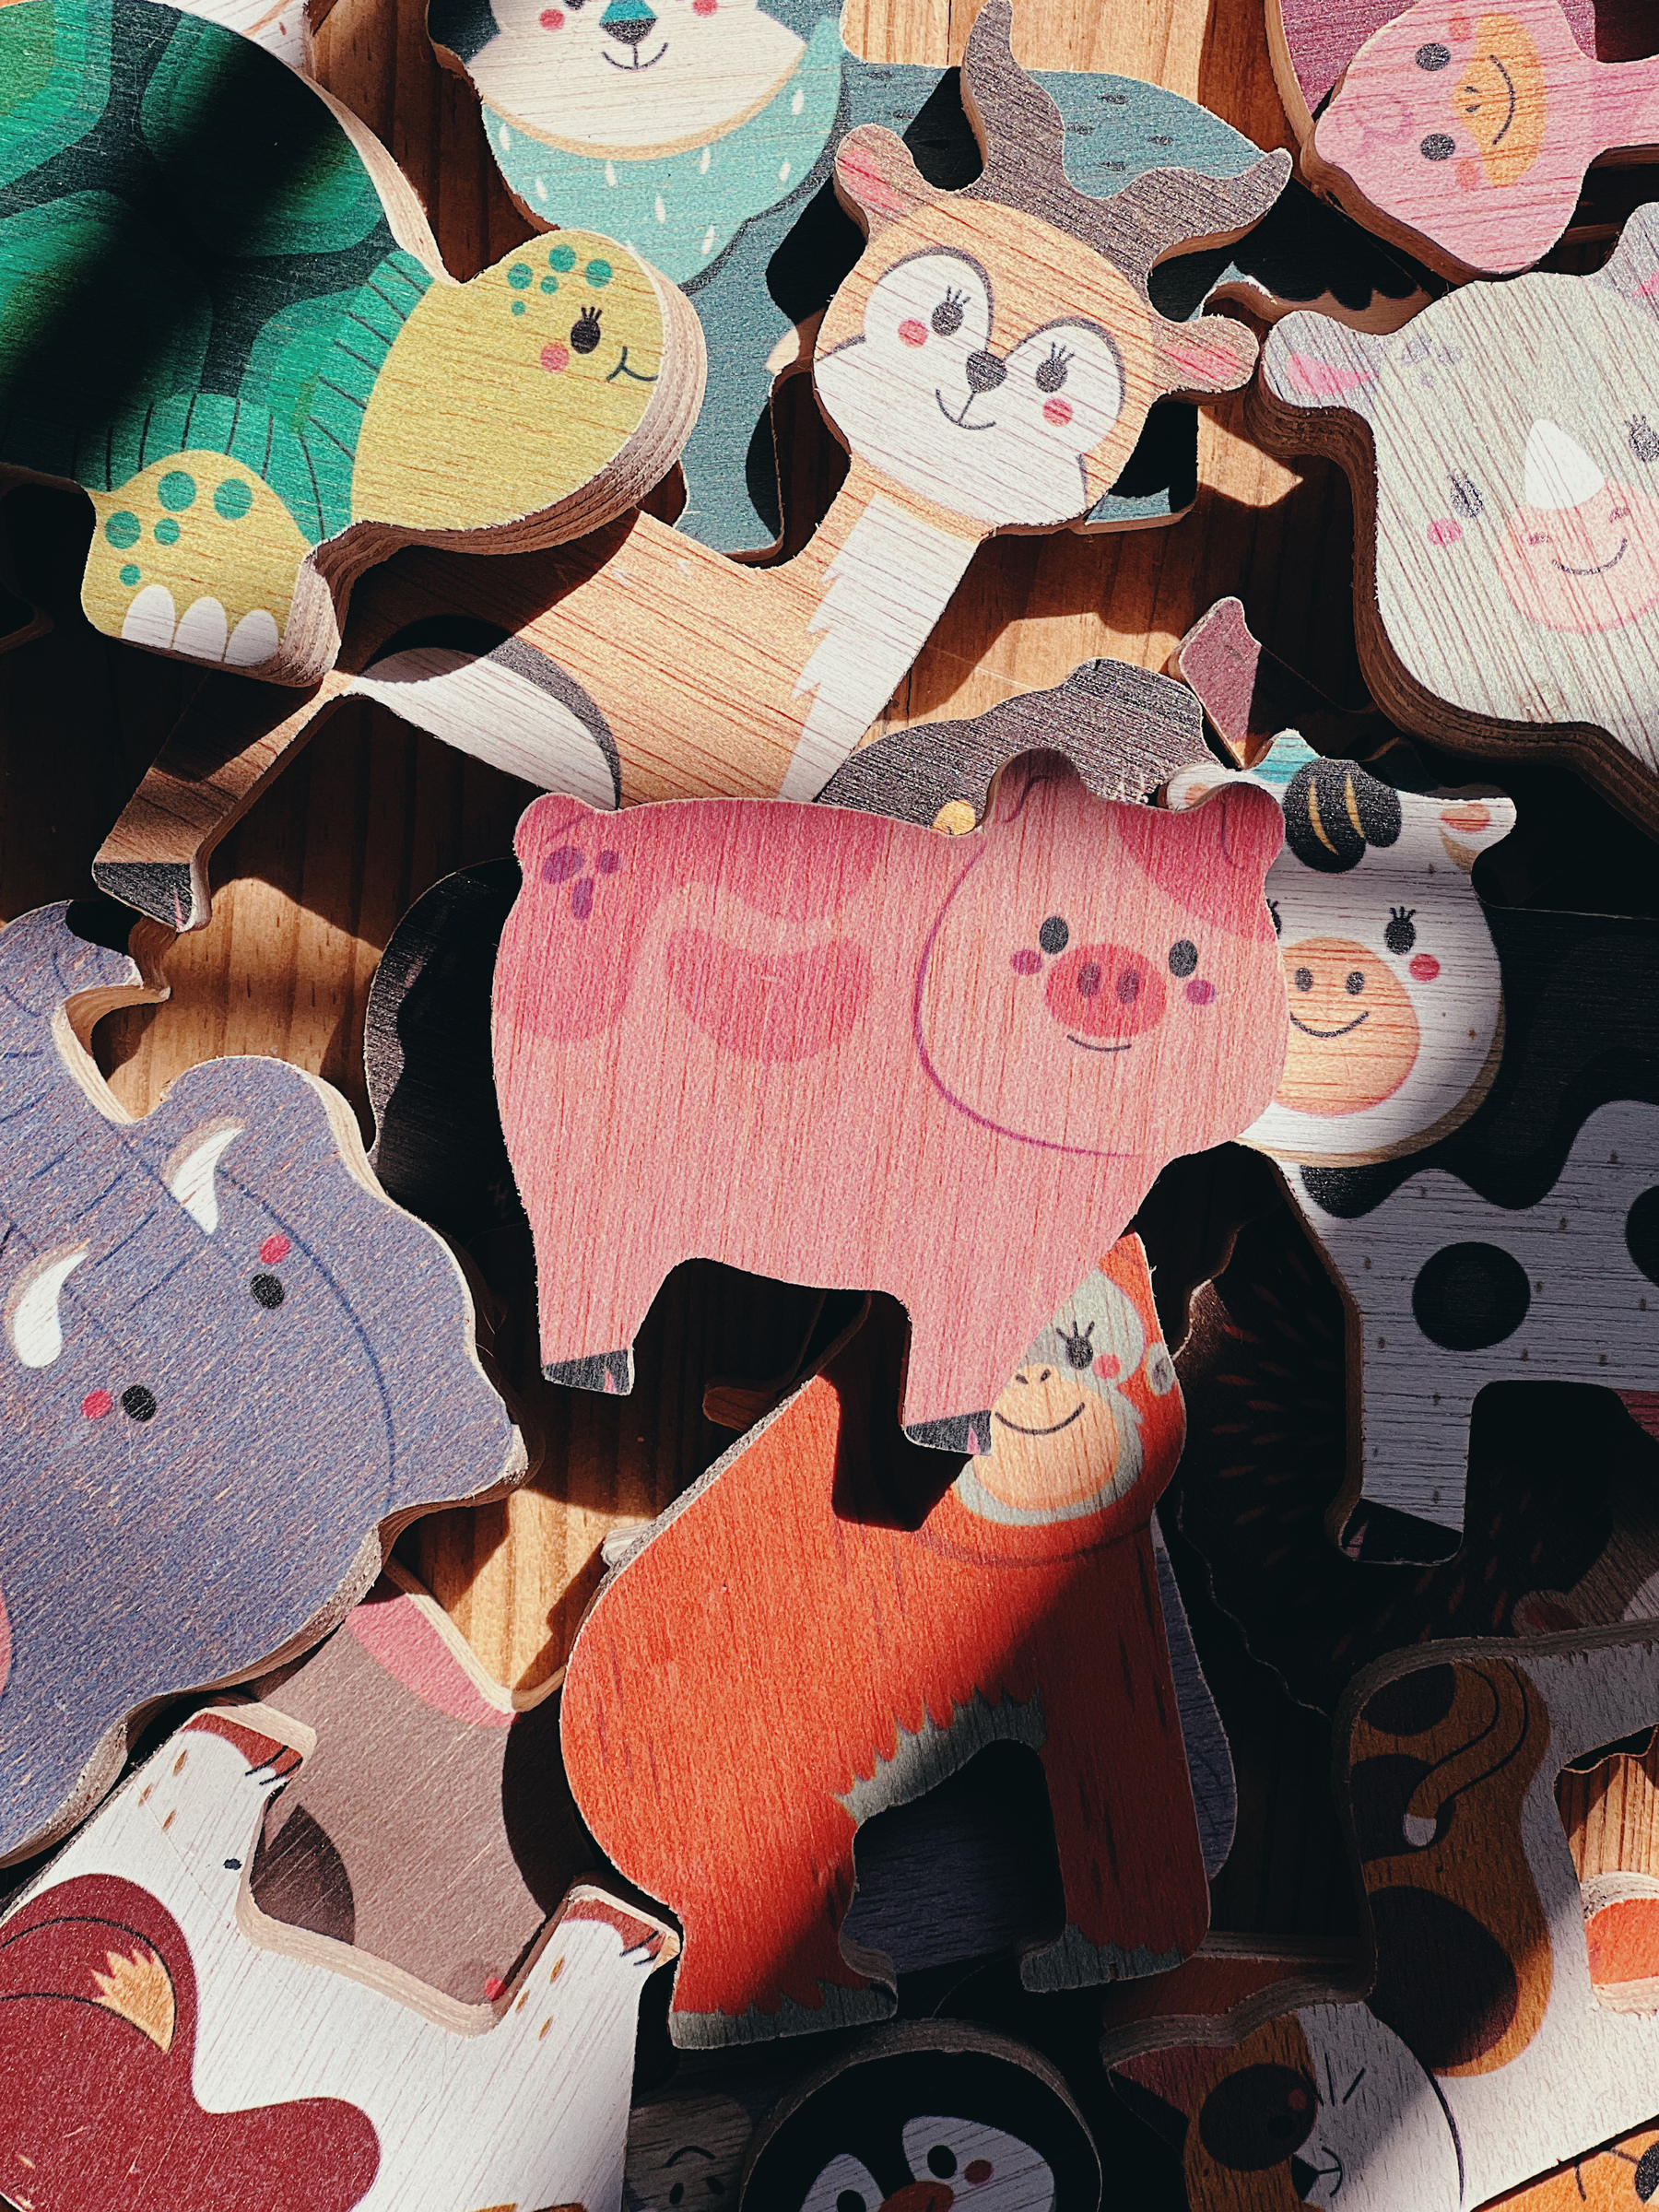 Wooden toys, animals. A pig takes center stage. 